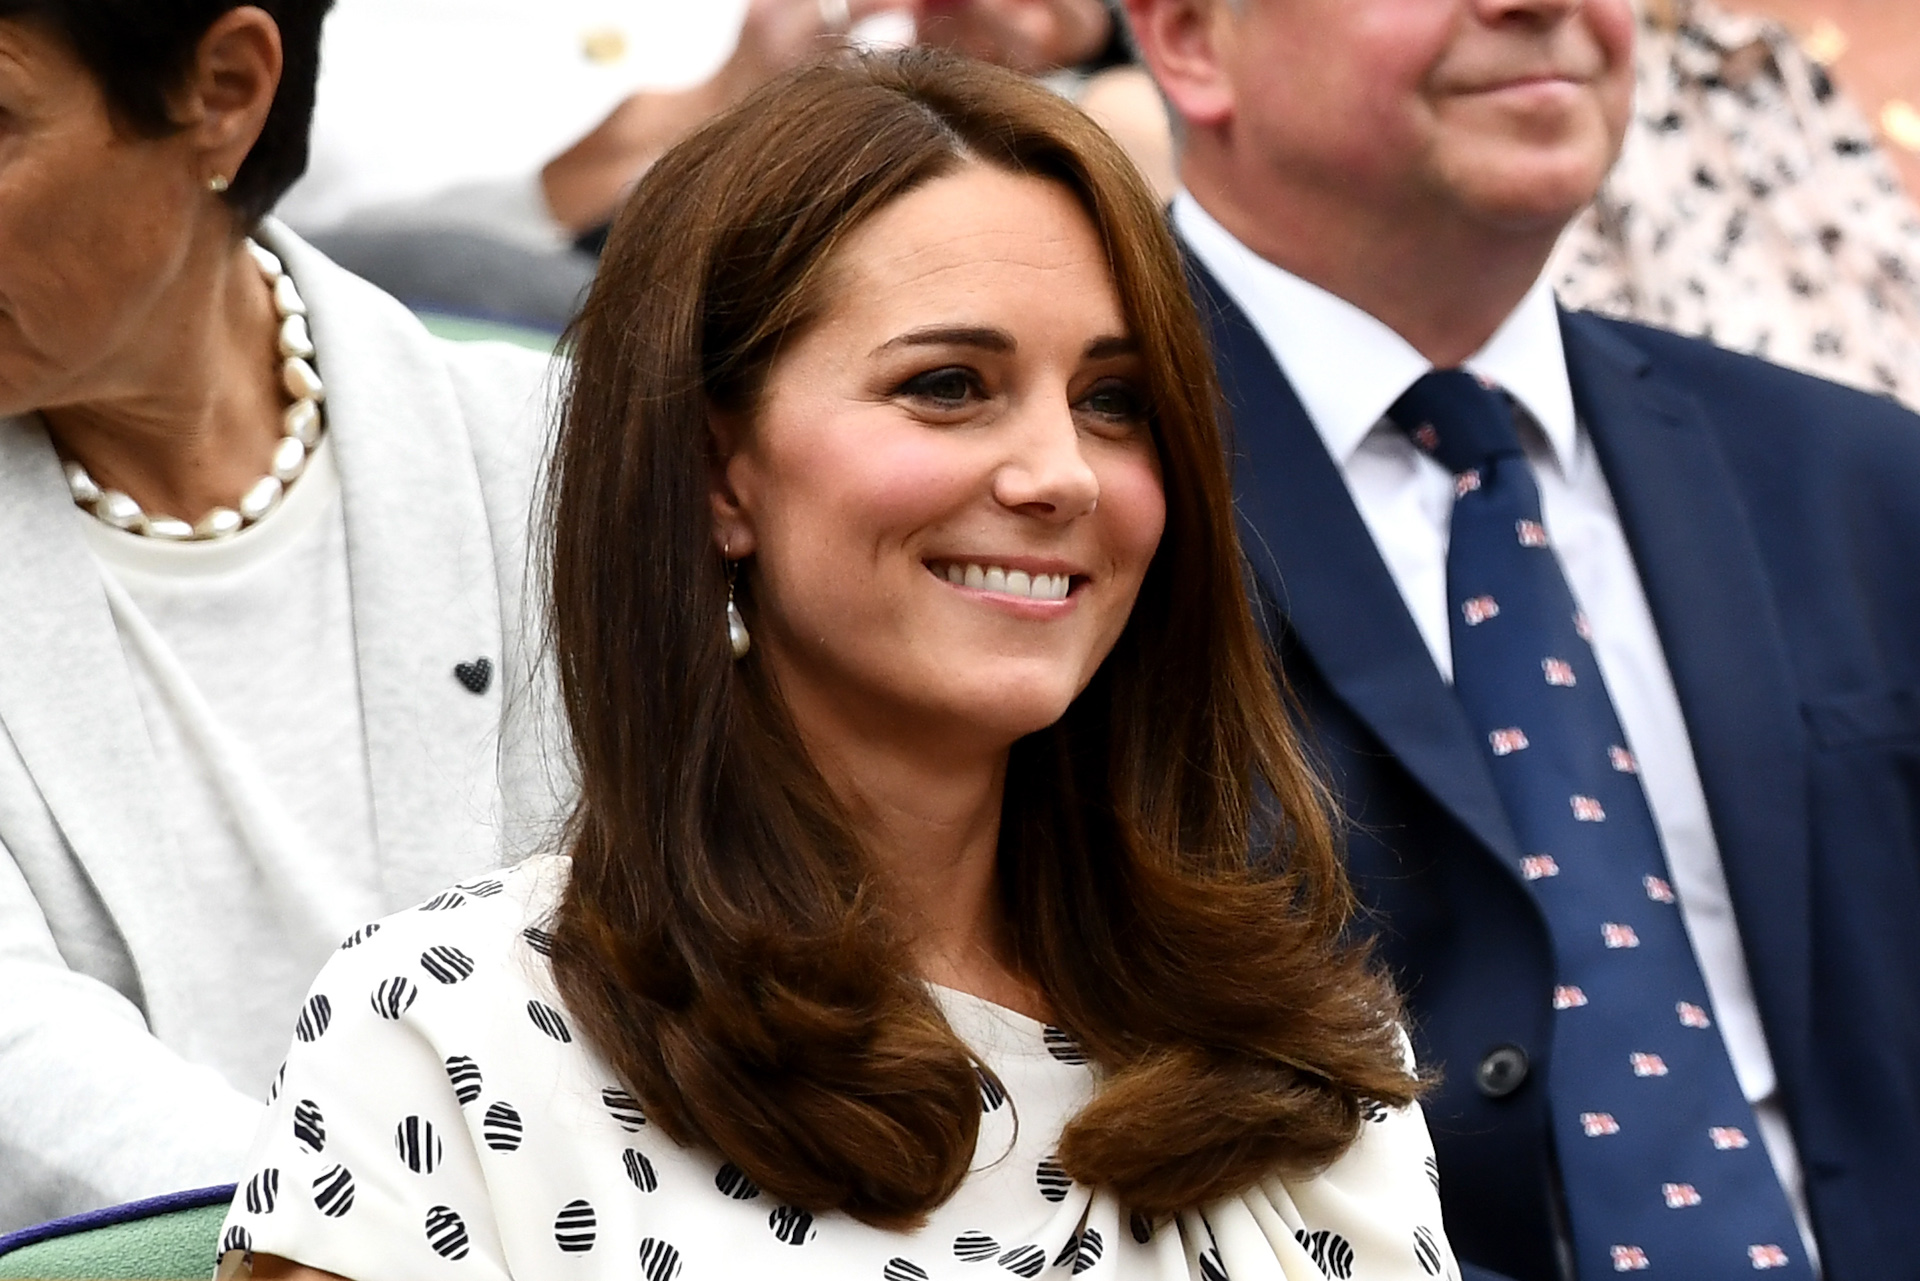 Kate Middleton: 'I wasn't happy about that'